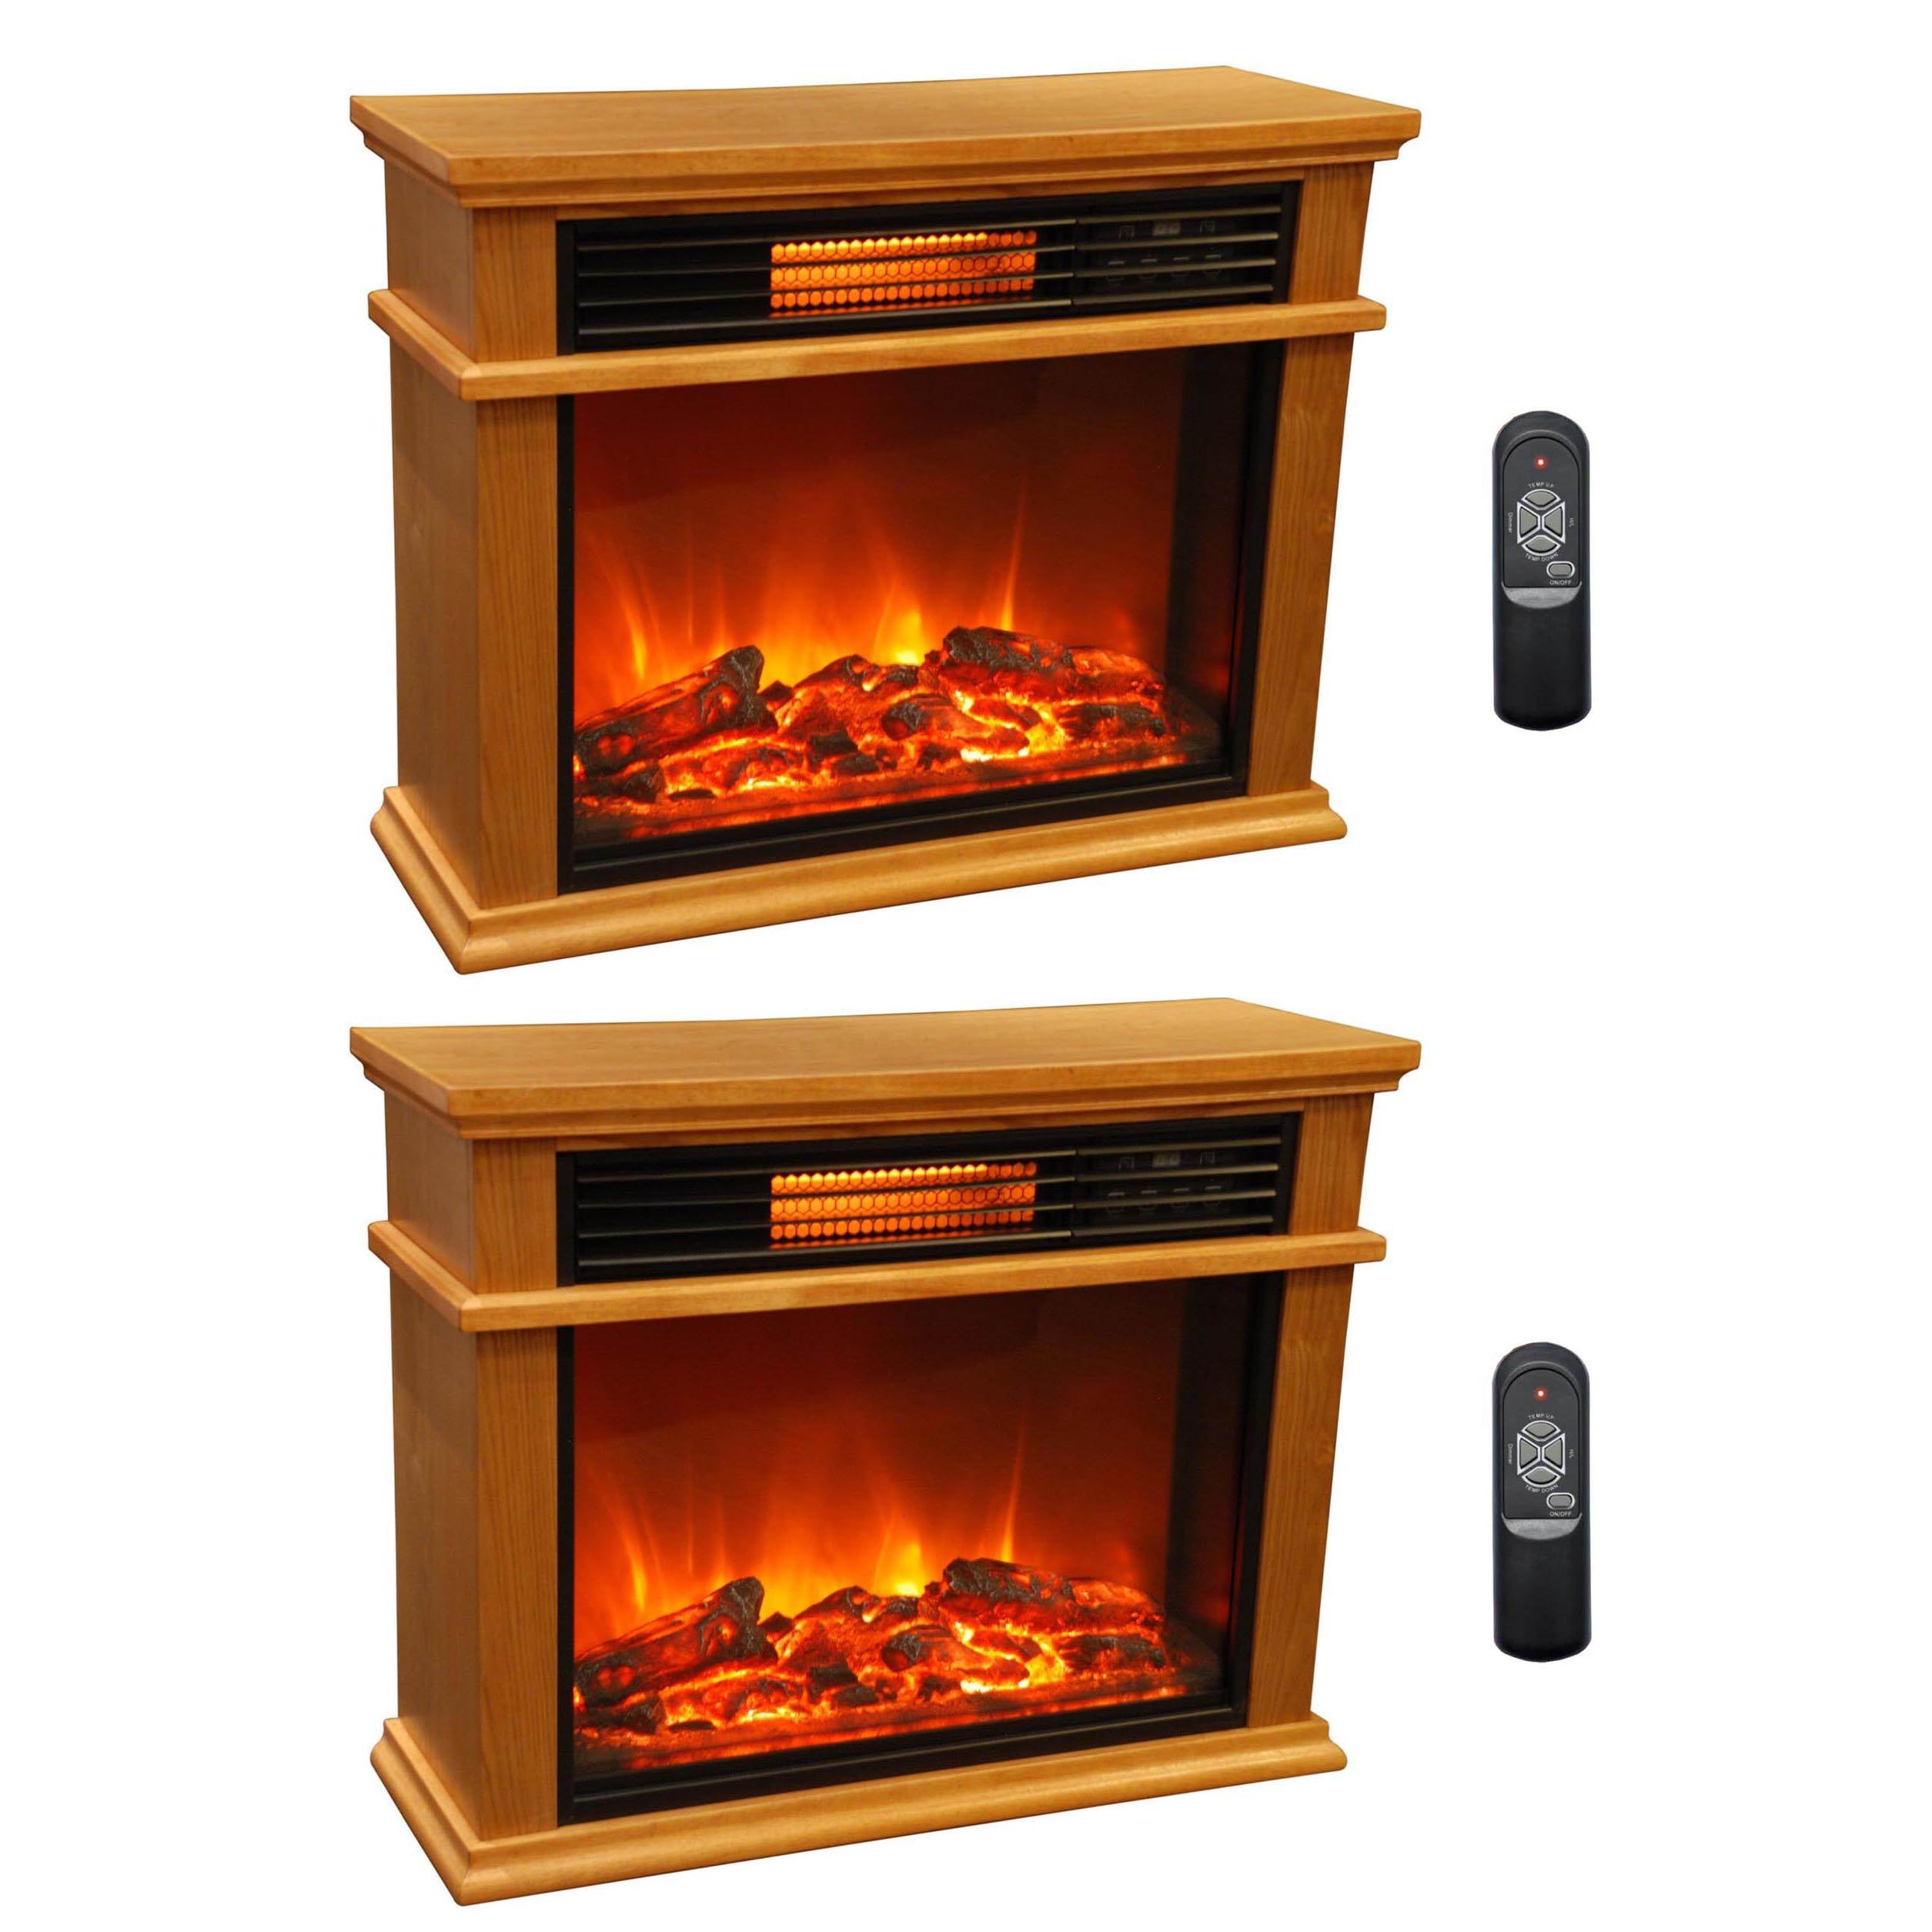 LifeSmart LifePro 3 Element Portable Electric Infrared Fireplace Heaters (Pair)